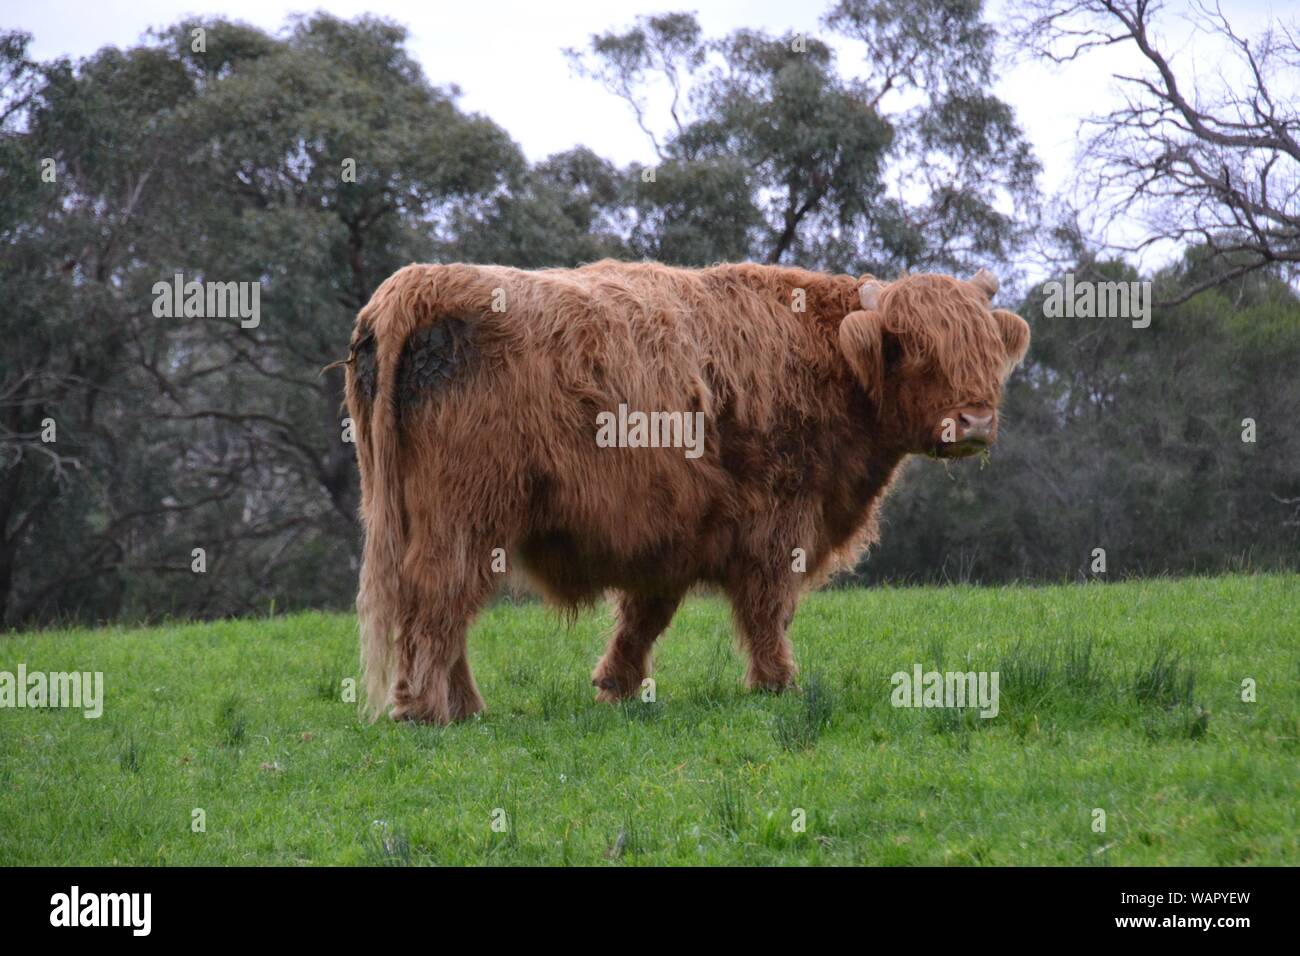 Highland bull livestock in a green grass paddock on a hill with gum trees in the background Stock Photo